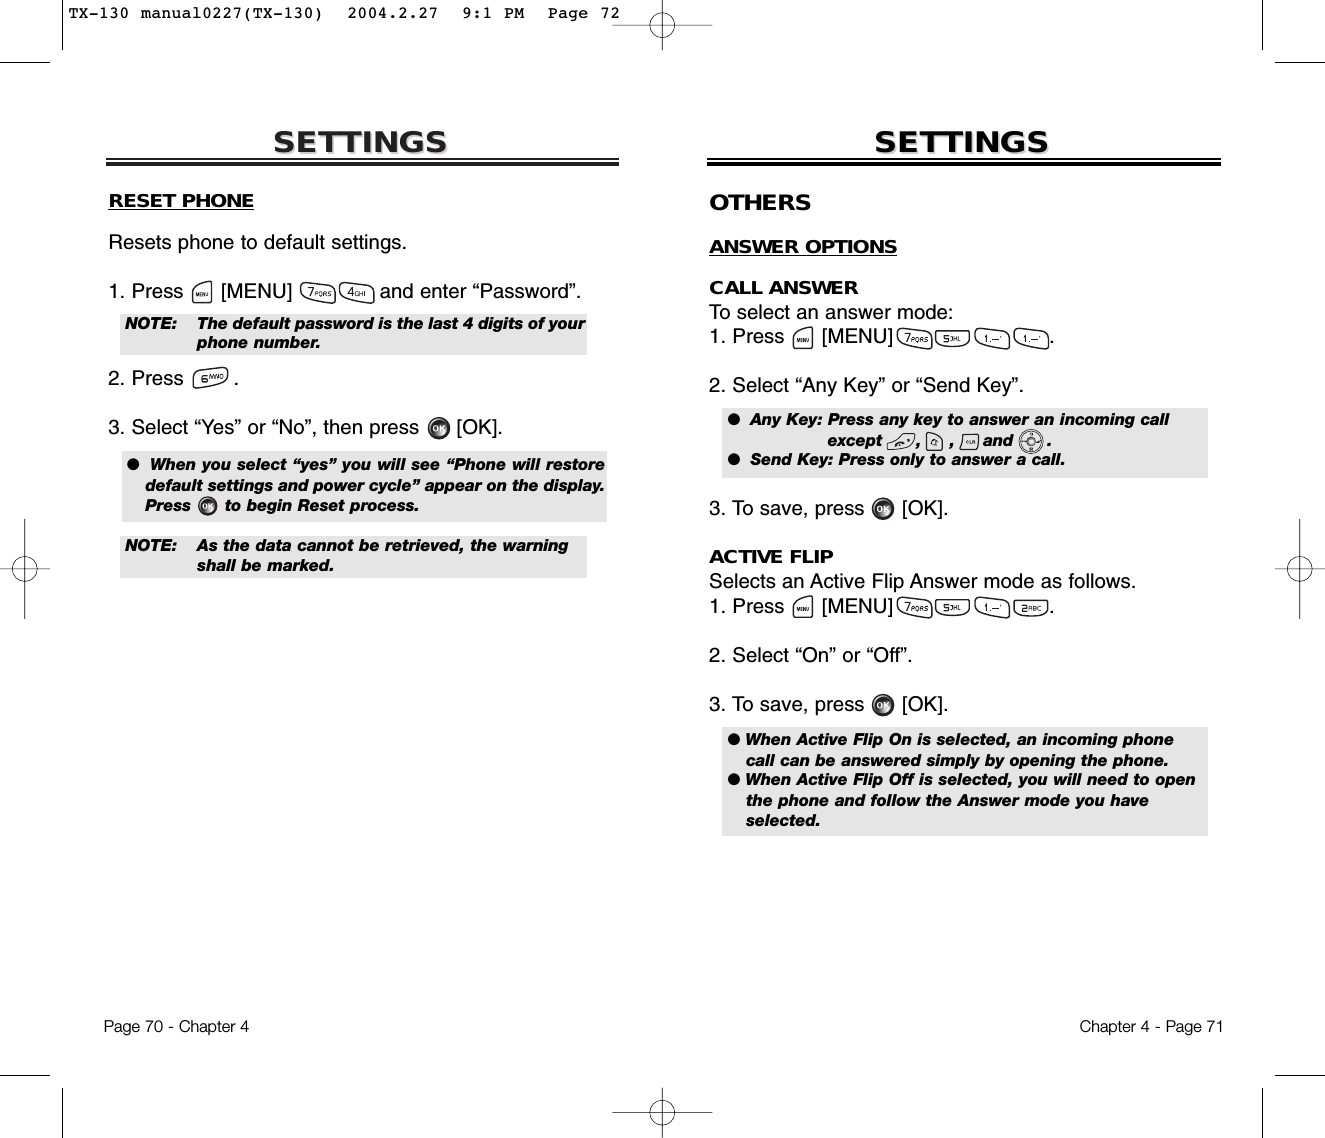 SETTINGSSETTINGSChapter 4 - Page 71Page 70 - Chapter 4SETTINGSSETTINGSRESET PHONEResets phone to default settings.1. Press      [MENU]              and enter “Password”.2. Press .3. Select “Yes” or “No”, then press [OK].●  When you select “yes” you will see “Phone will restoredefault settings and power cycle” appear on the display.Press      to begin Reset process.NOTE: The default password is the last 4 digits of yourphone number.NOTE: As the data cannot be retrieved, the warning shall be marked.OTHERSANSWER OPTIONSCALL ANSWERTo select an answer mode:1. Press      [MENU]                         .2. Select “Any Key” or “Send Key”.3. To save, press [OK].ACTIVE FLIPSelects an Active Flip Answer mode as follows.1. Press      [MENU]                         .2. Select “On” or “Off”.3. To save, press [OK].●  Any Key: Press any key to answer an incoming call except      ,     ,     and      .●  Send Key: Press only to answer a call.● When Active Flip On is selected, an incoming phonecall can be answered simply by opening the phone.● When Active Flip Off is selected, you will need to openthe phone and follow the Answer mode you haveselected.TX-130 manual0227(TX-130)  2004.2.27  9:1 PM  Page 72